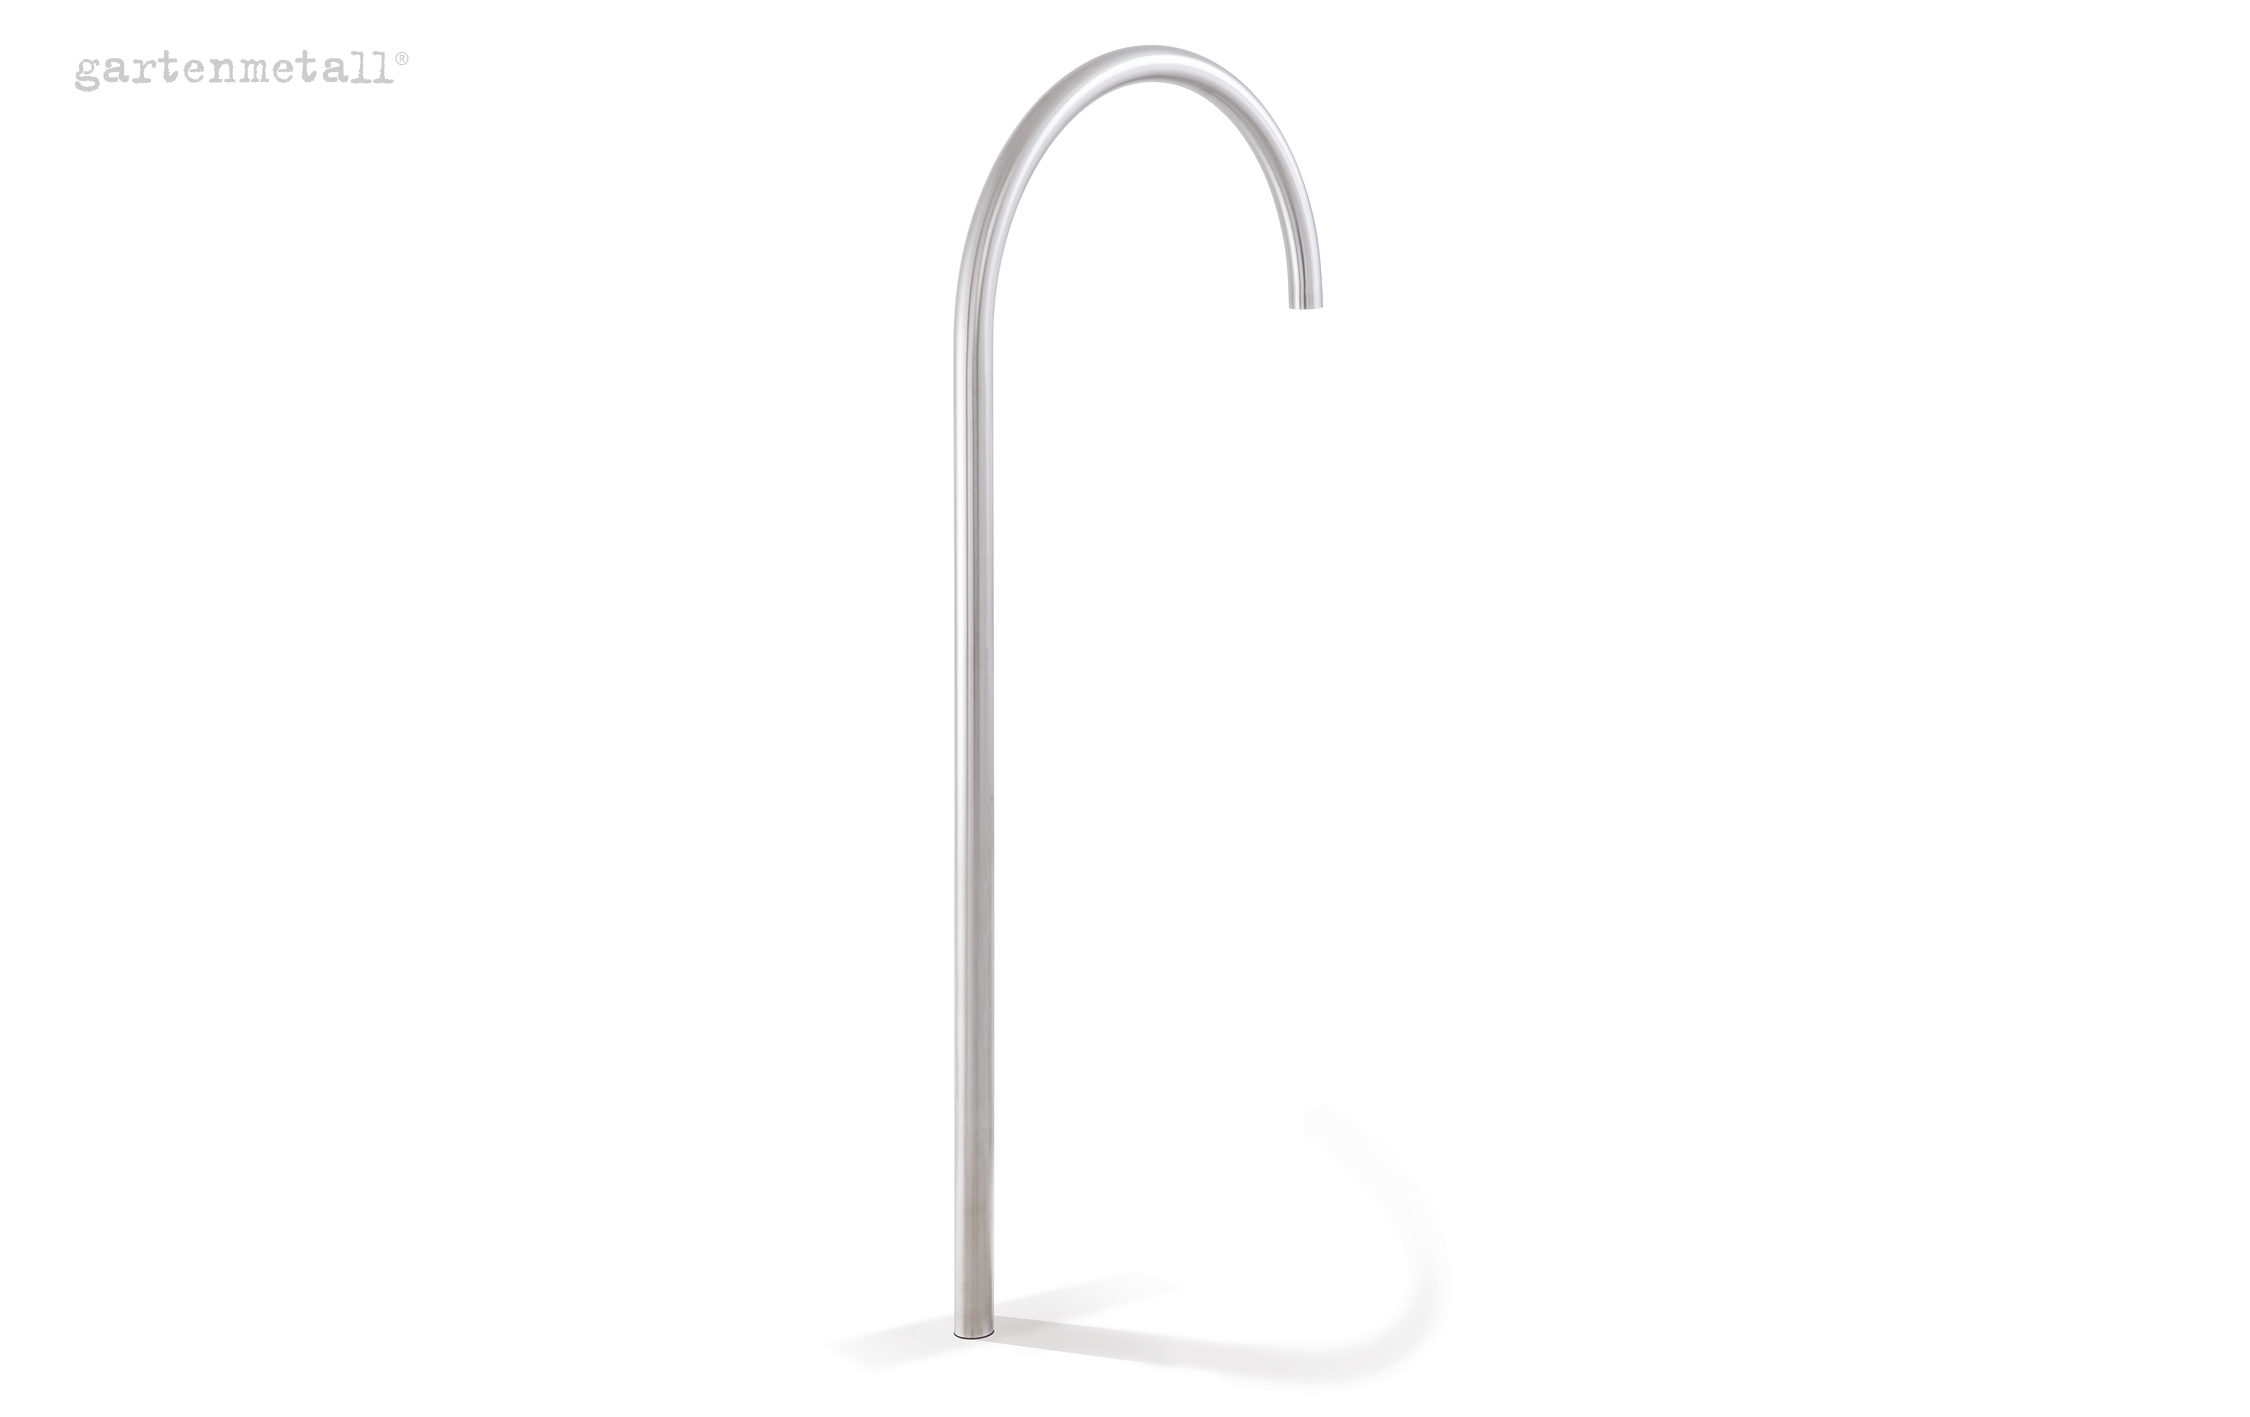 Well arch ROFAN ø48mm for setting in concrete VARIANTE 1B